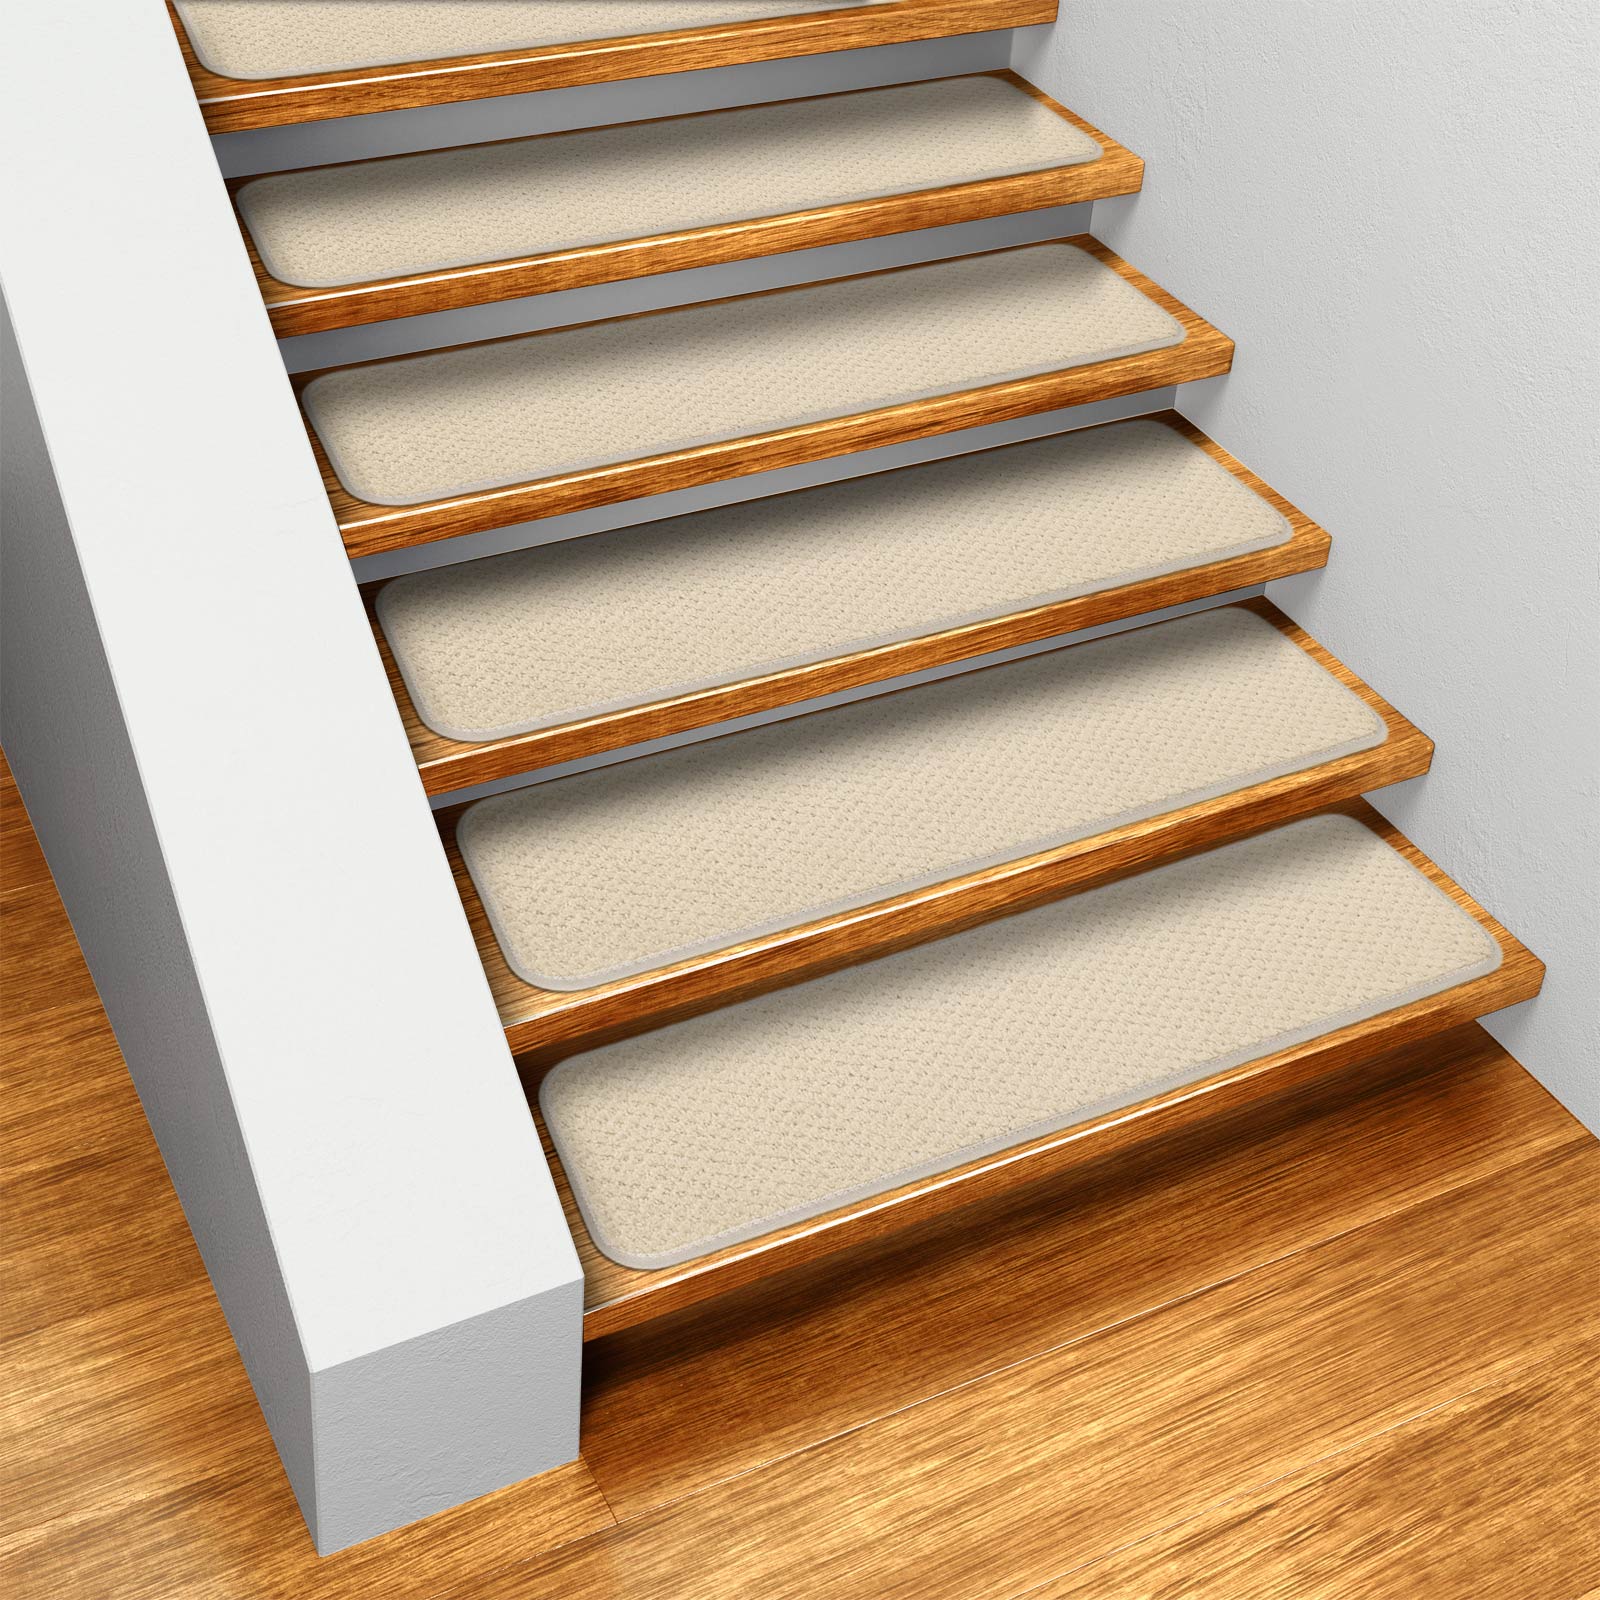 House, Home and More Set of 15 Skid-resistant Carpet Stair Treads - Ivory Cream - 8 In. X 30 In.